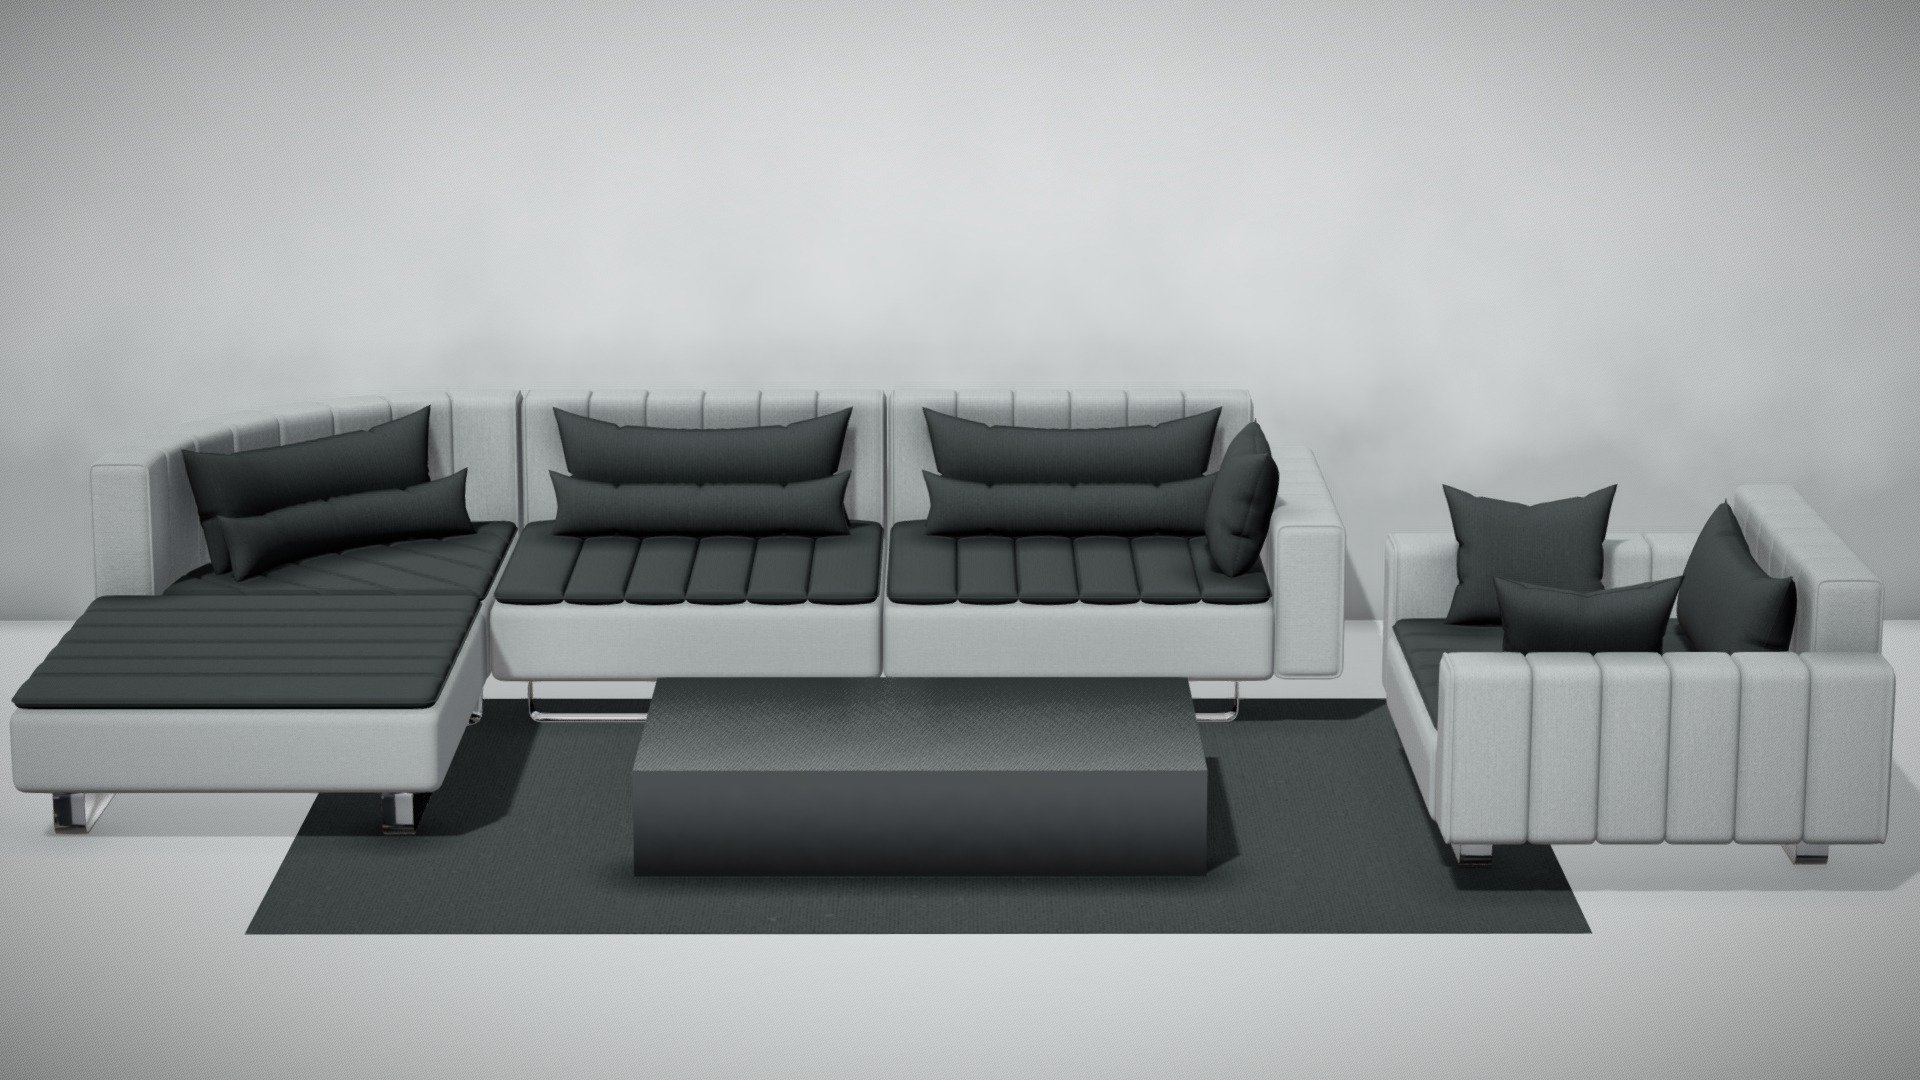 Thats a Sofa Set with 5 different Sitting places.
They can be rearranged to match with the adjacent Sides 3d model